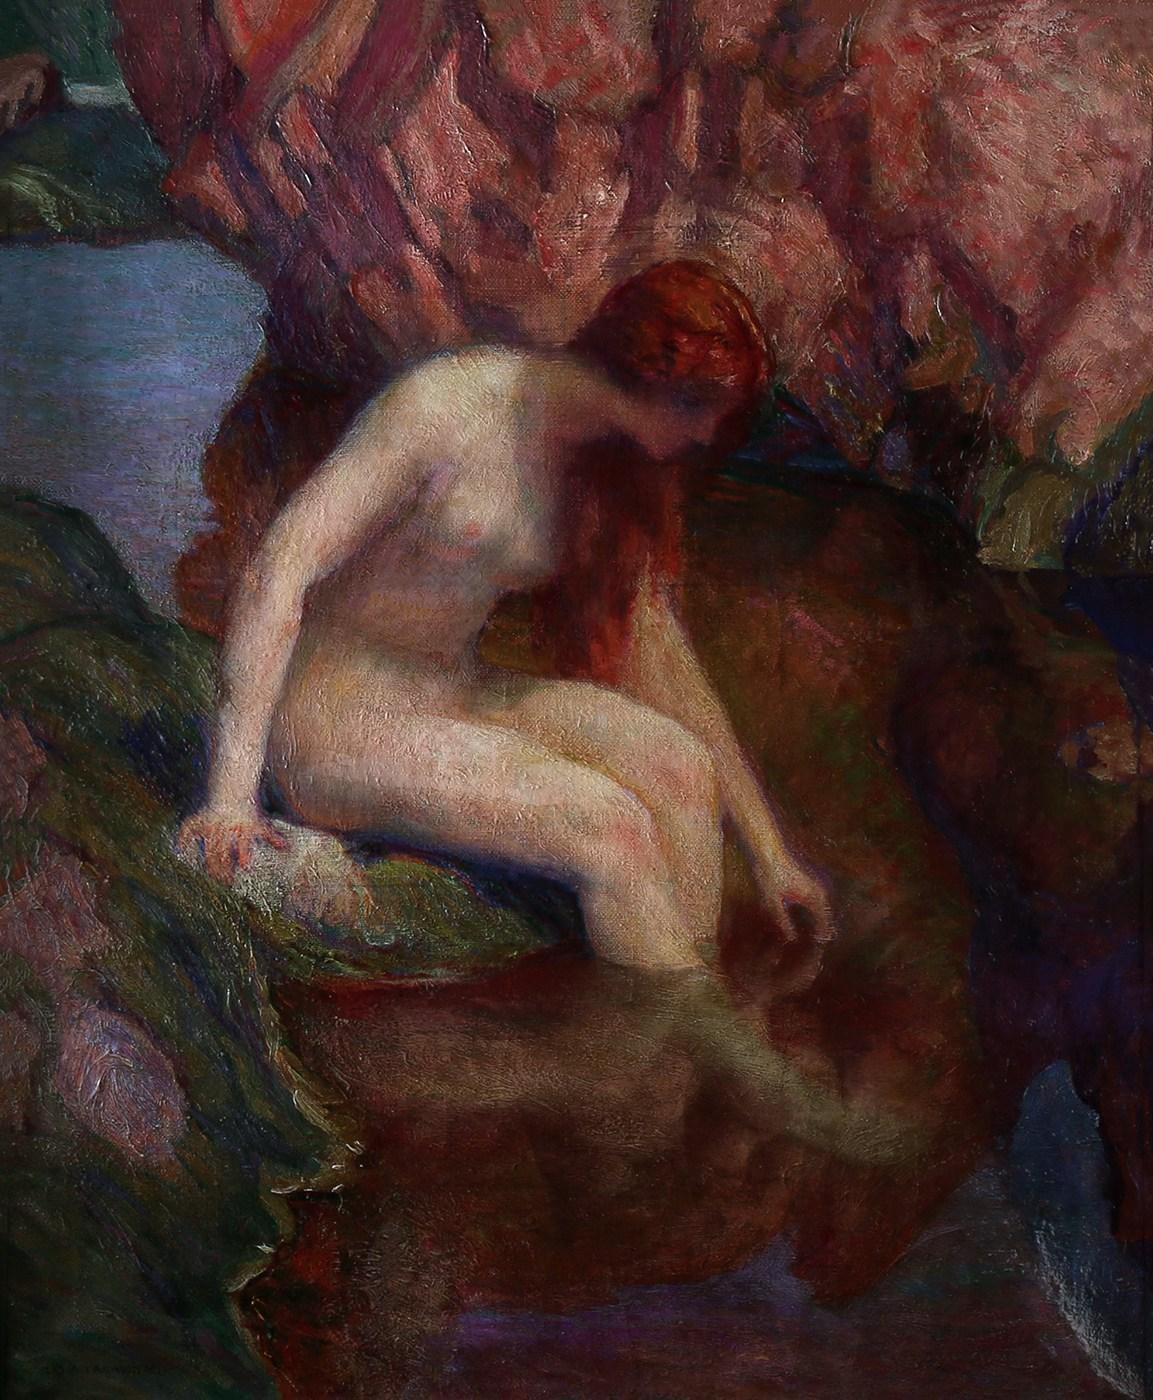 Her Reflection In A Stream - Black Nude Painting by Charles Allan Winter